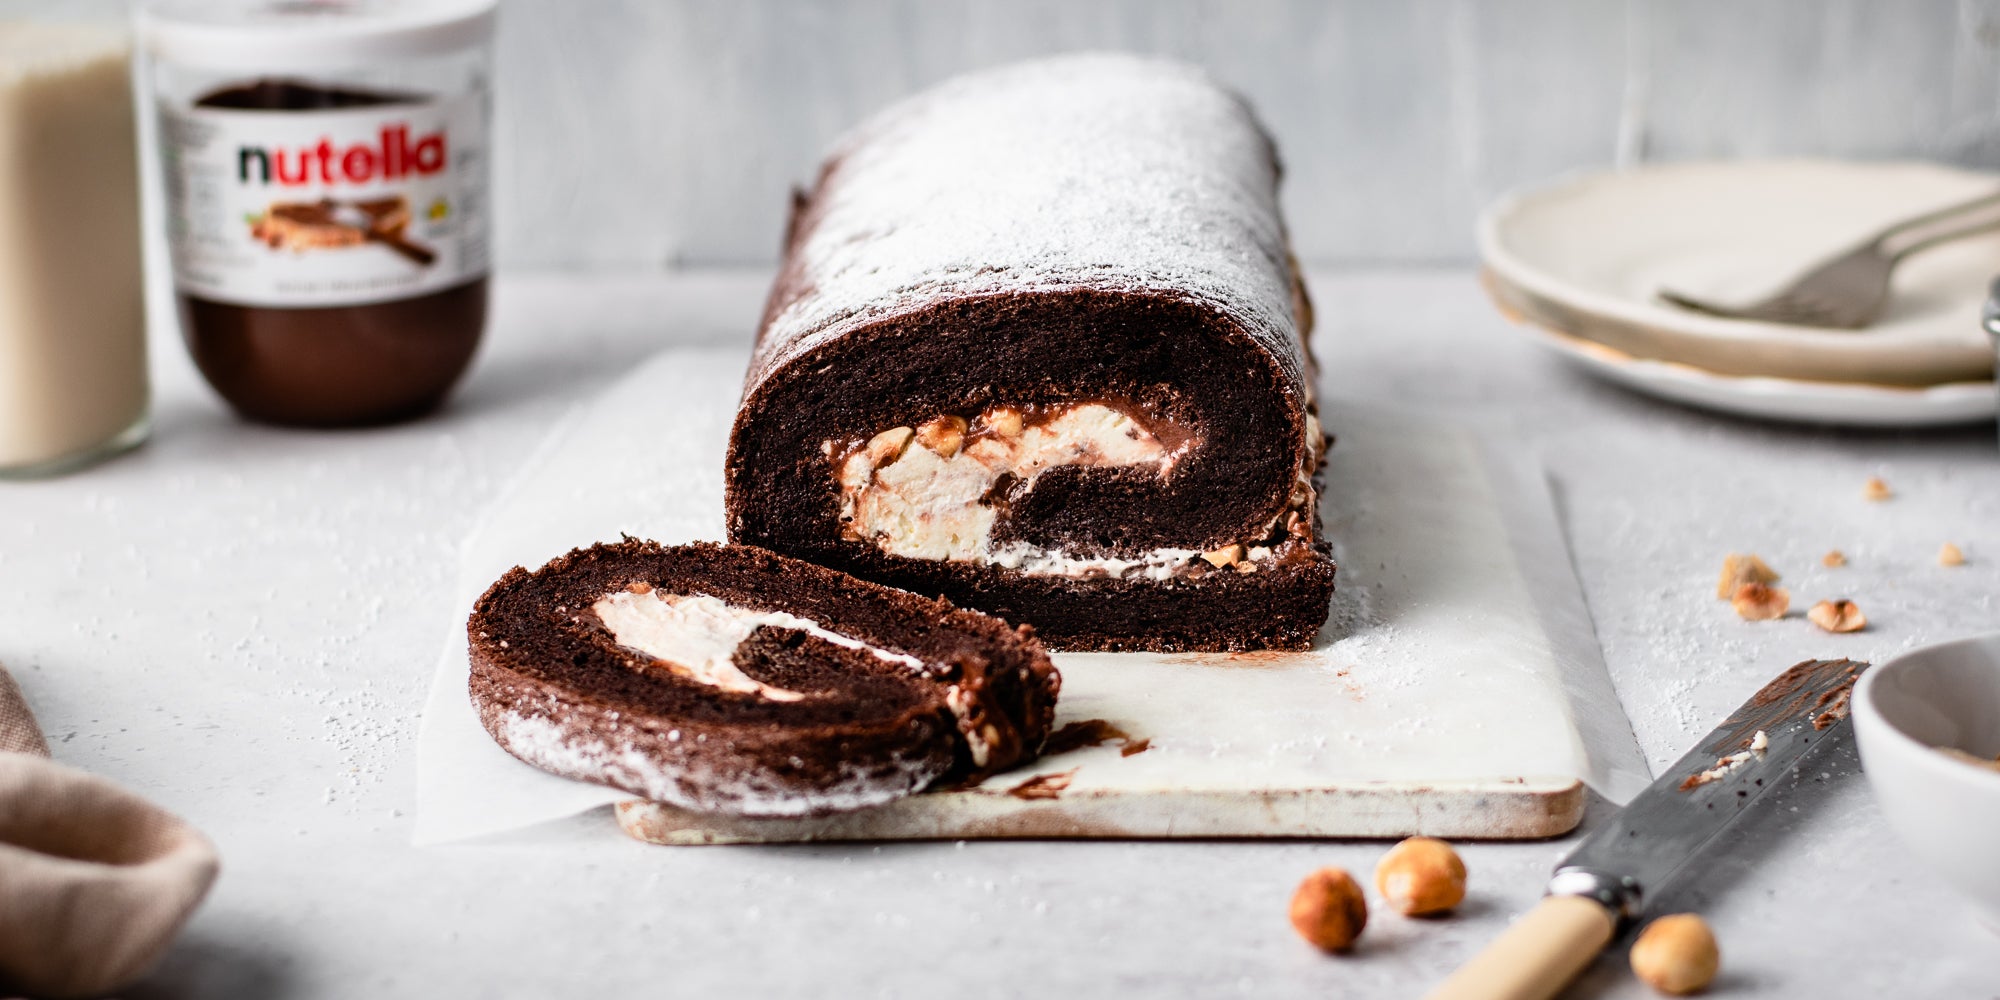 Chocolate Roulade sliced on a serving board, next to a knifes and scatters of hazelnuts